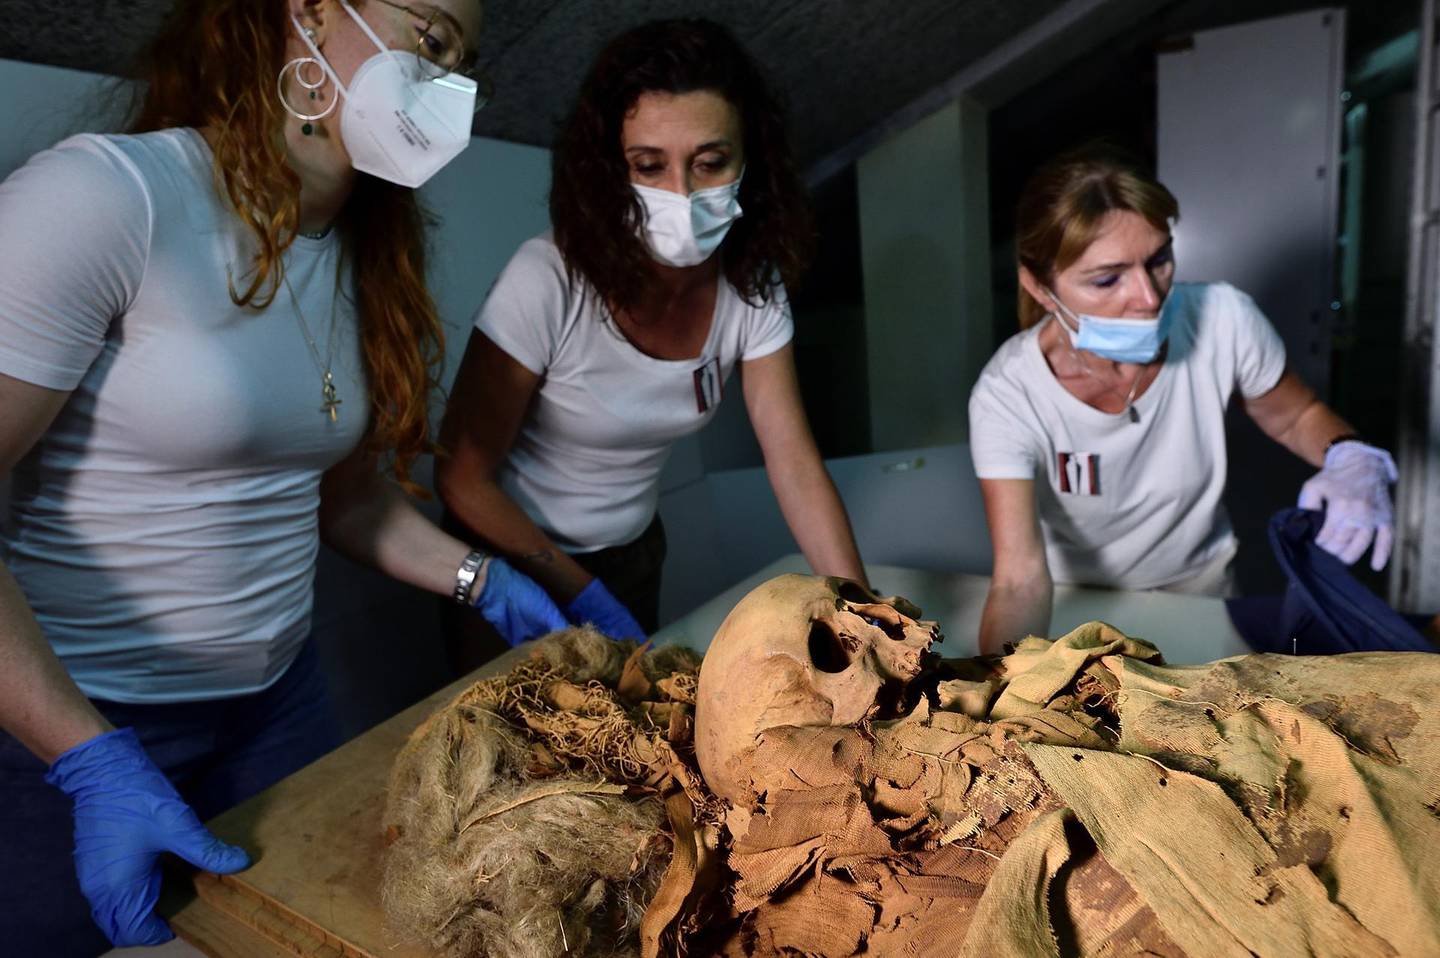 Researchers prepare to move an Egyptian mummy from the Civic Archaeological Museum of Bergamo to Milan's Policlinico hospital to undergo a CT scan in order to investigate its history, in Bergamo, Italy, June 21, 2021. Picture taken June 21, 2021. REUTERS/Flavio Lo Scalzo